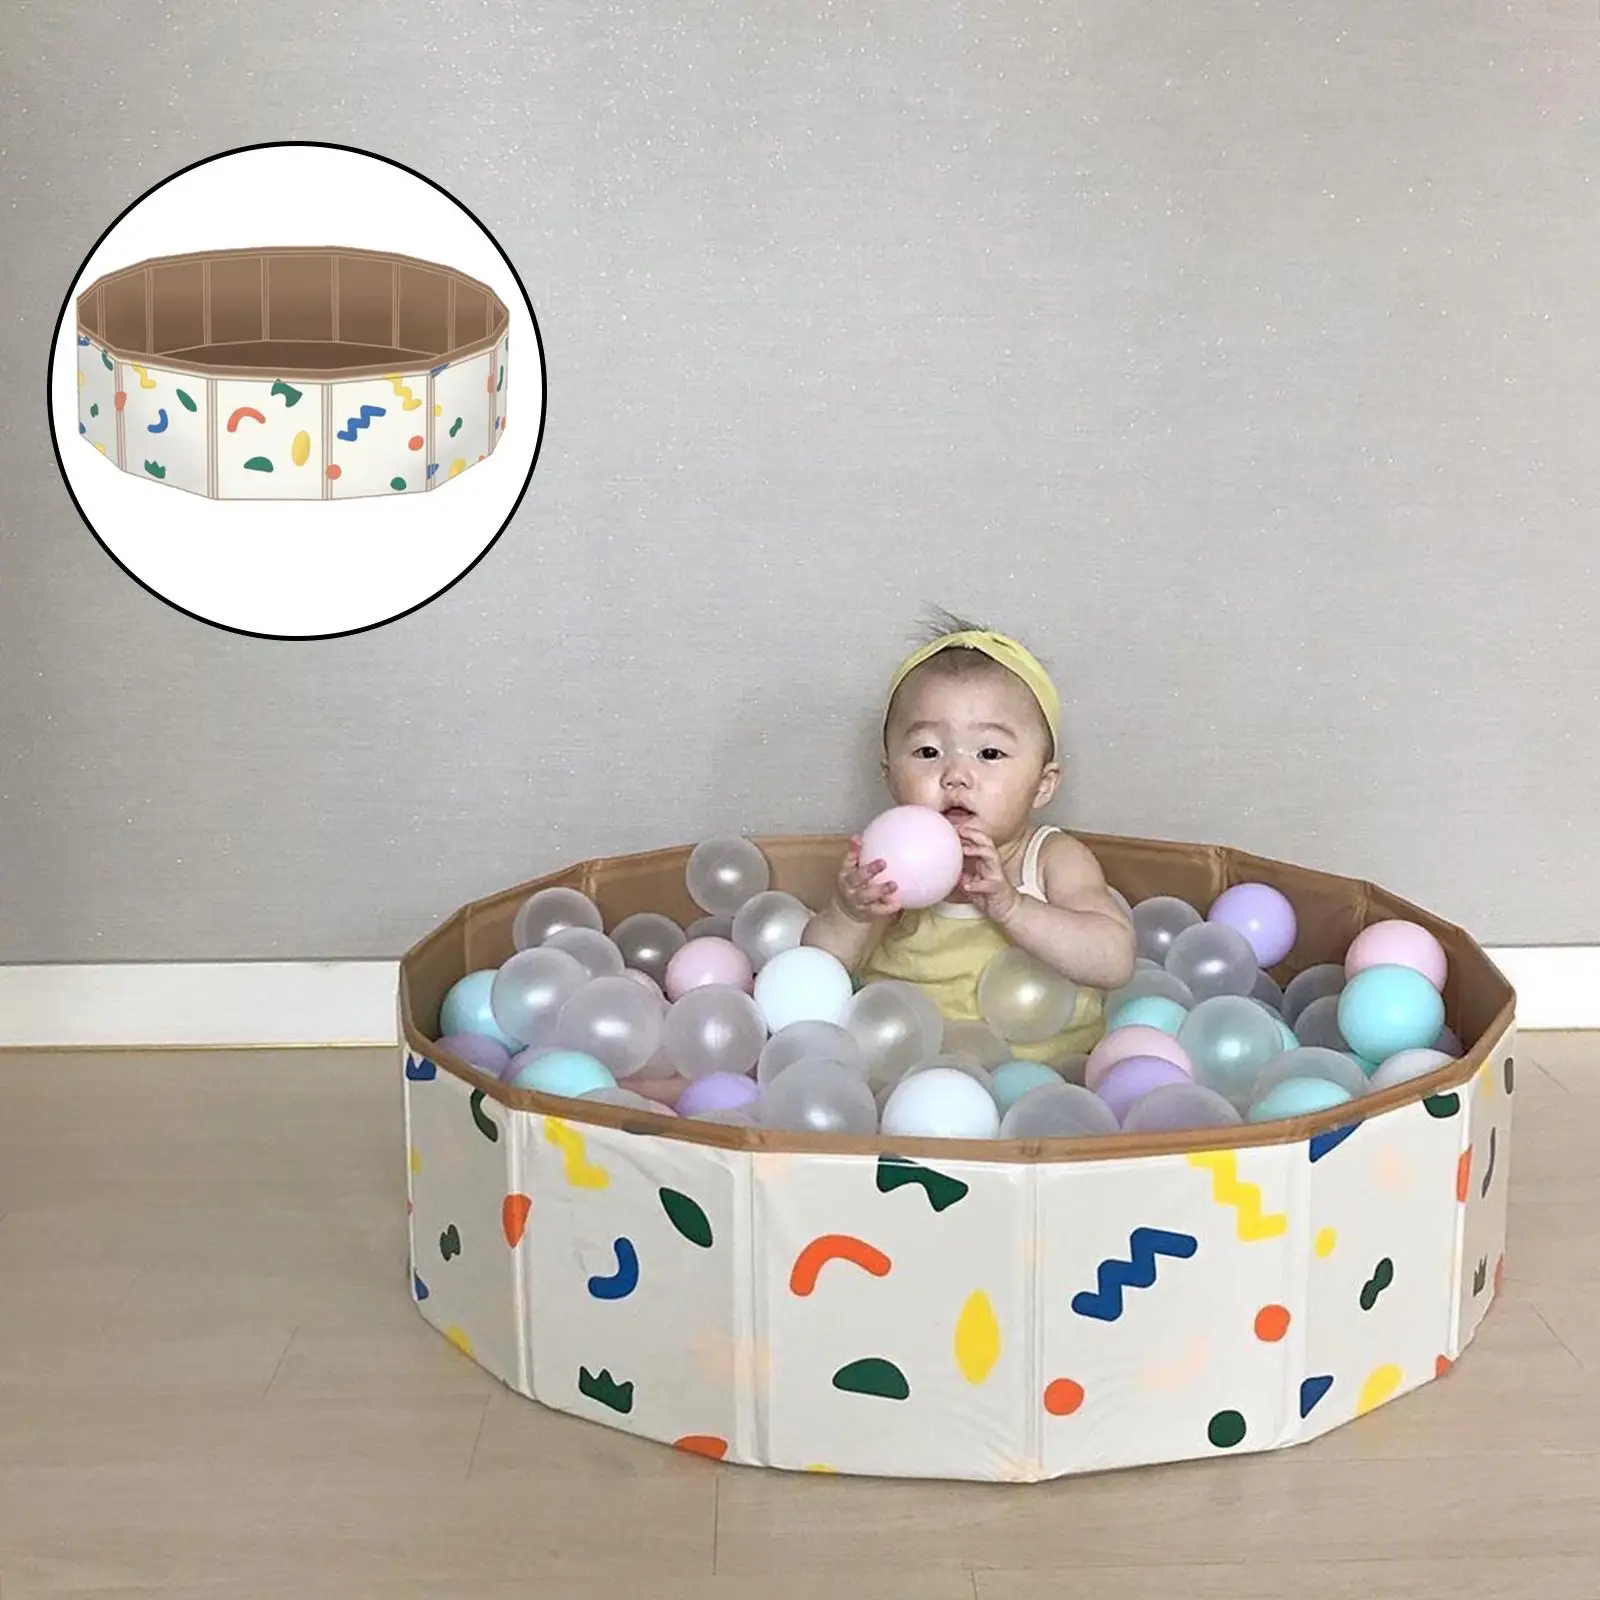 Foldable Baby Swimming Pool Fences Game Barrier Indoors Ball Pool Gifts